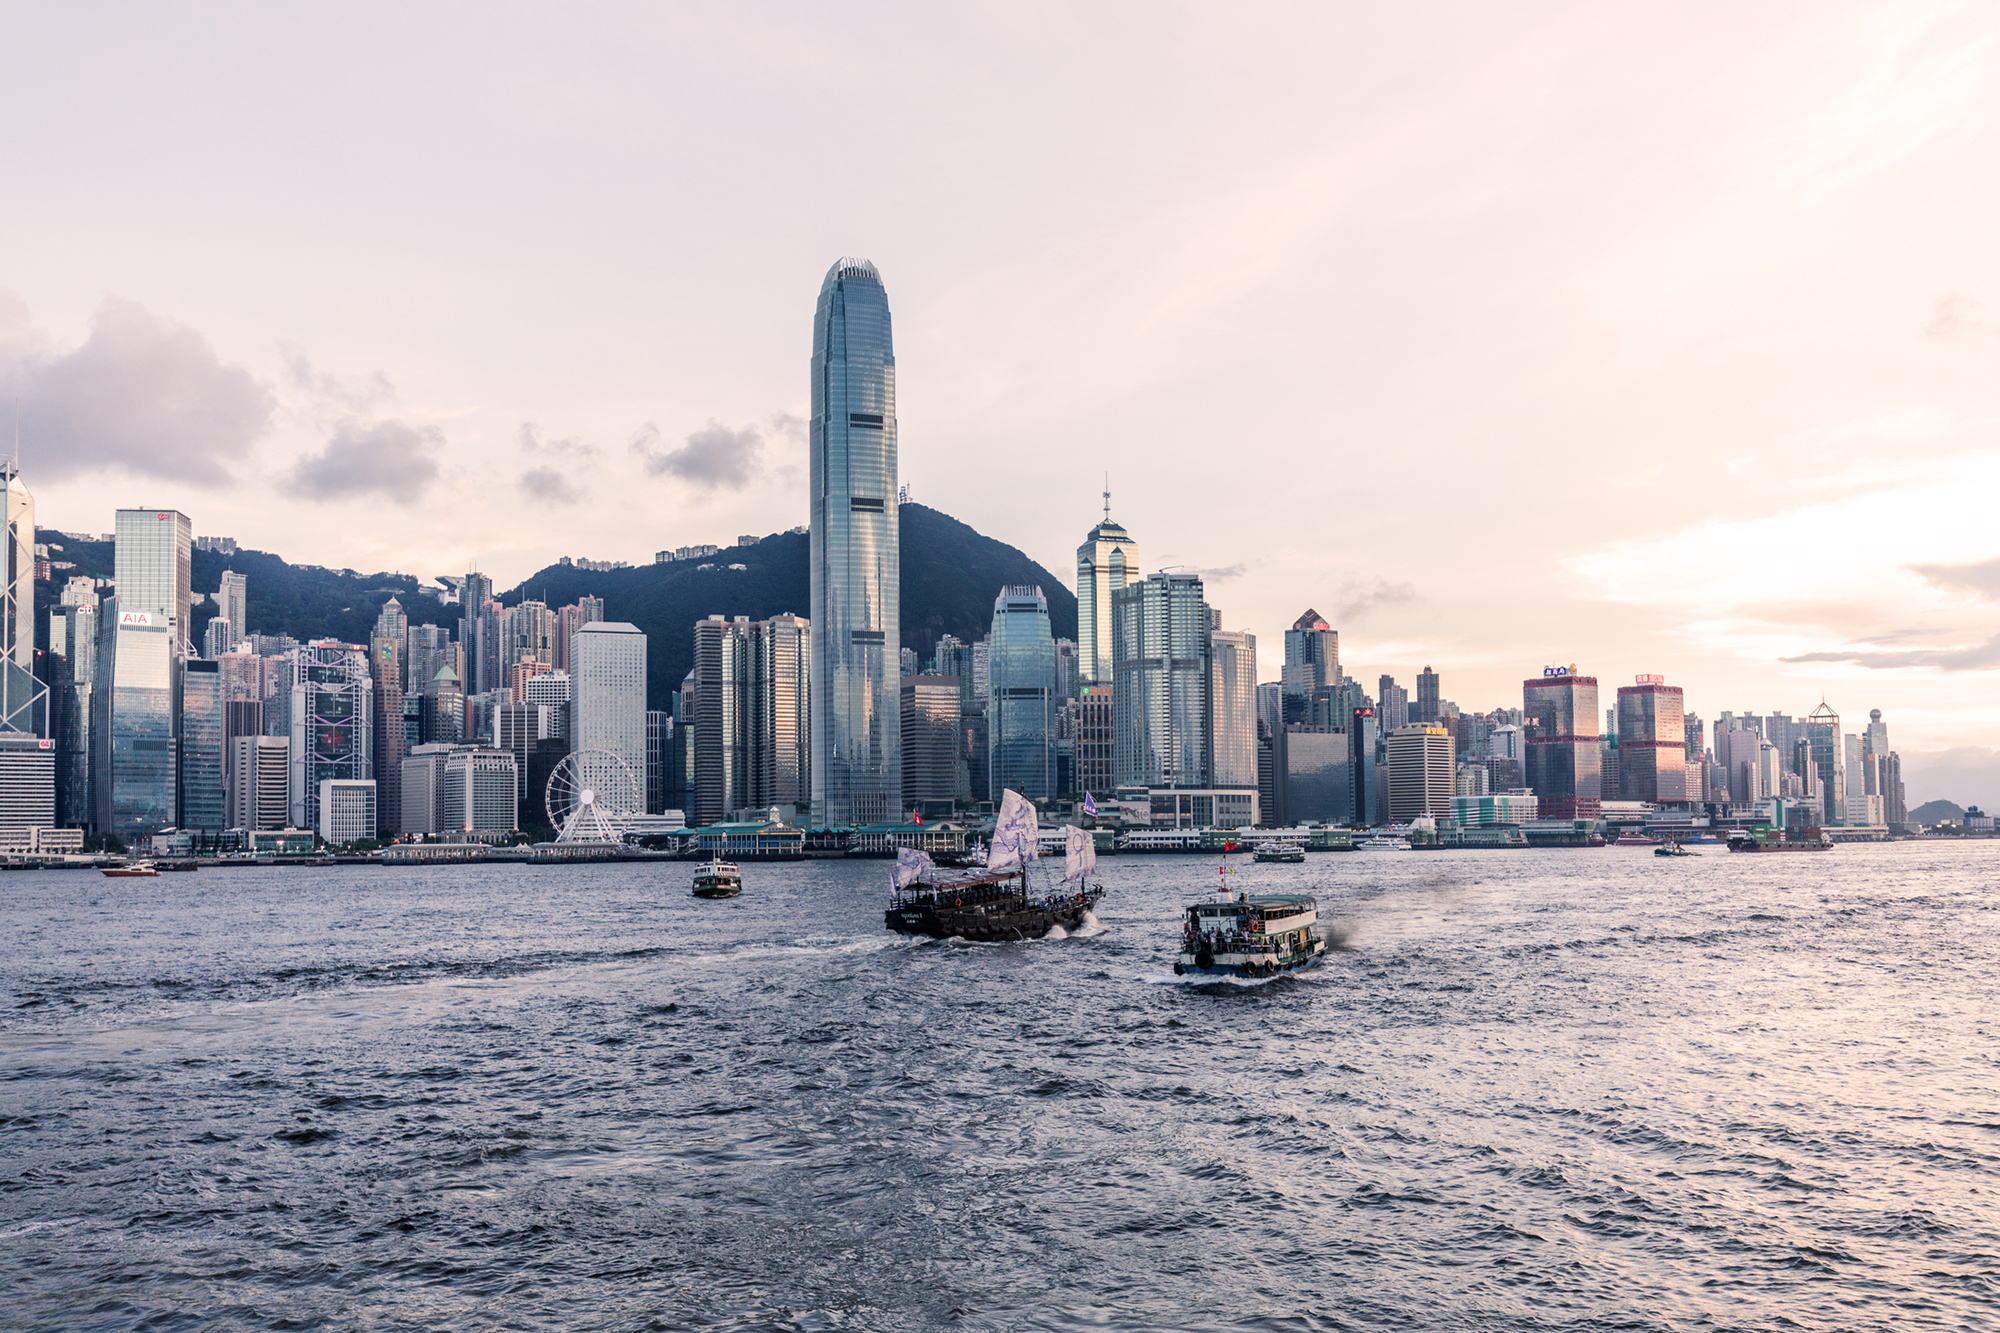 Discover the a series of the Hong Kong top tourist attractions around the hotel's neighbourhood with our insider travel guide